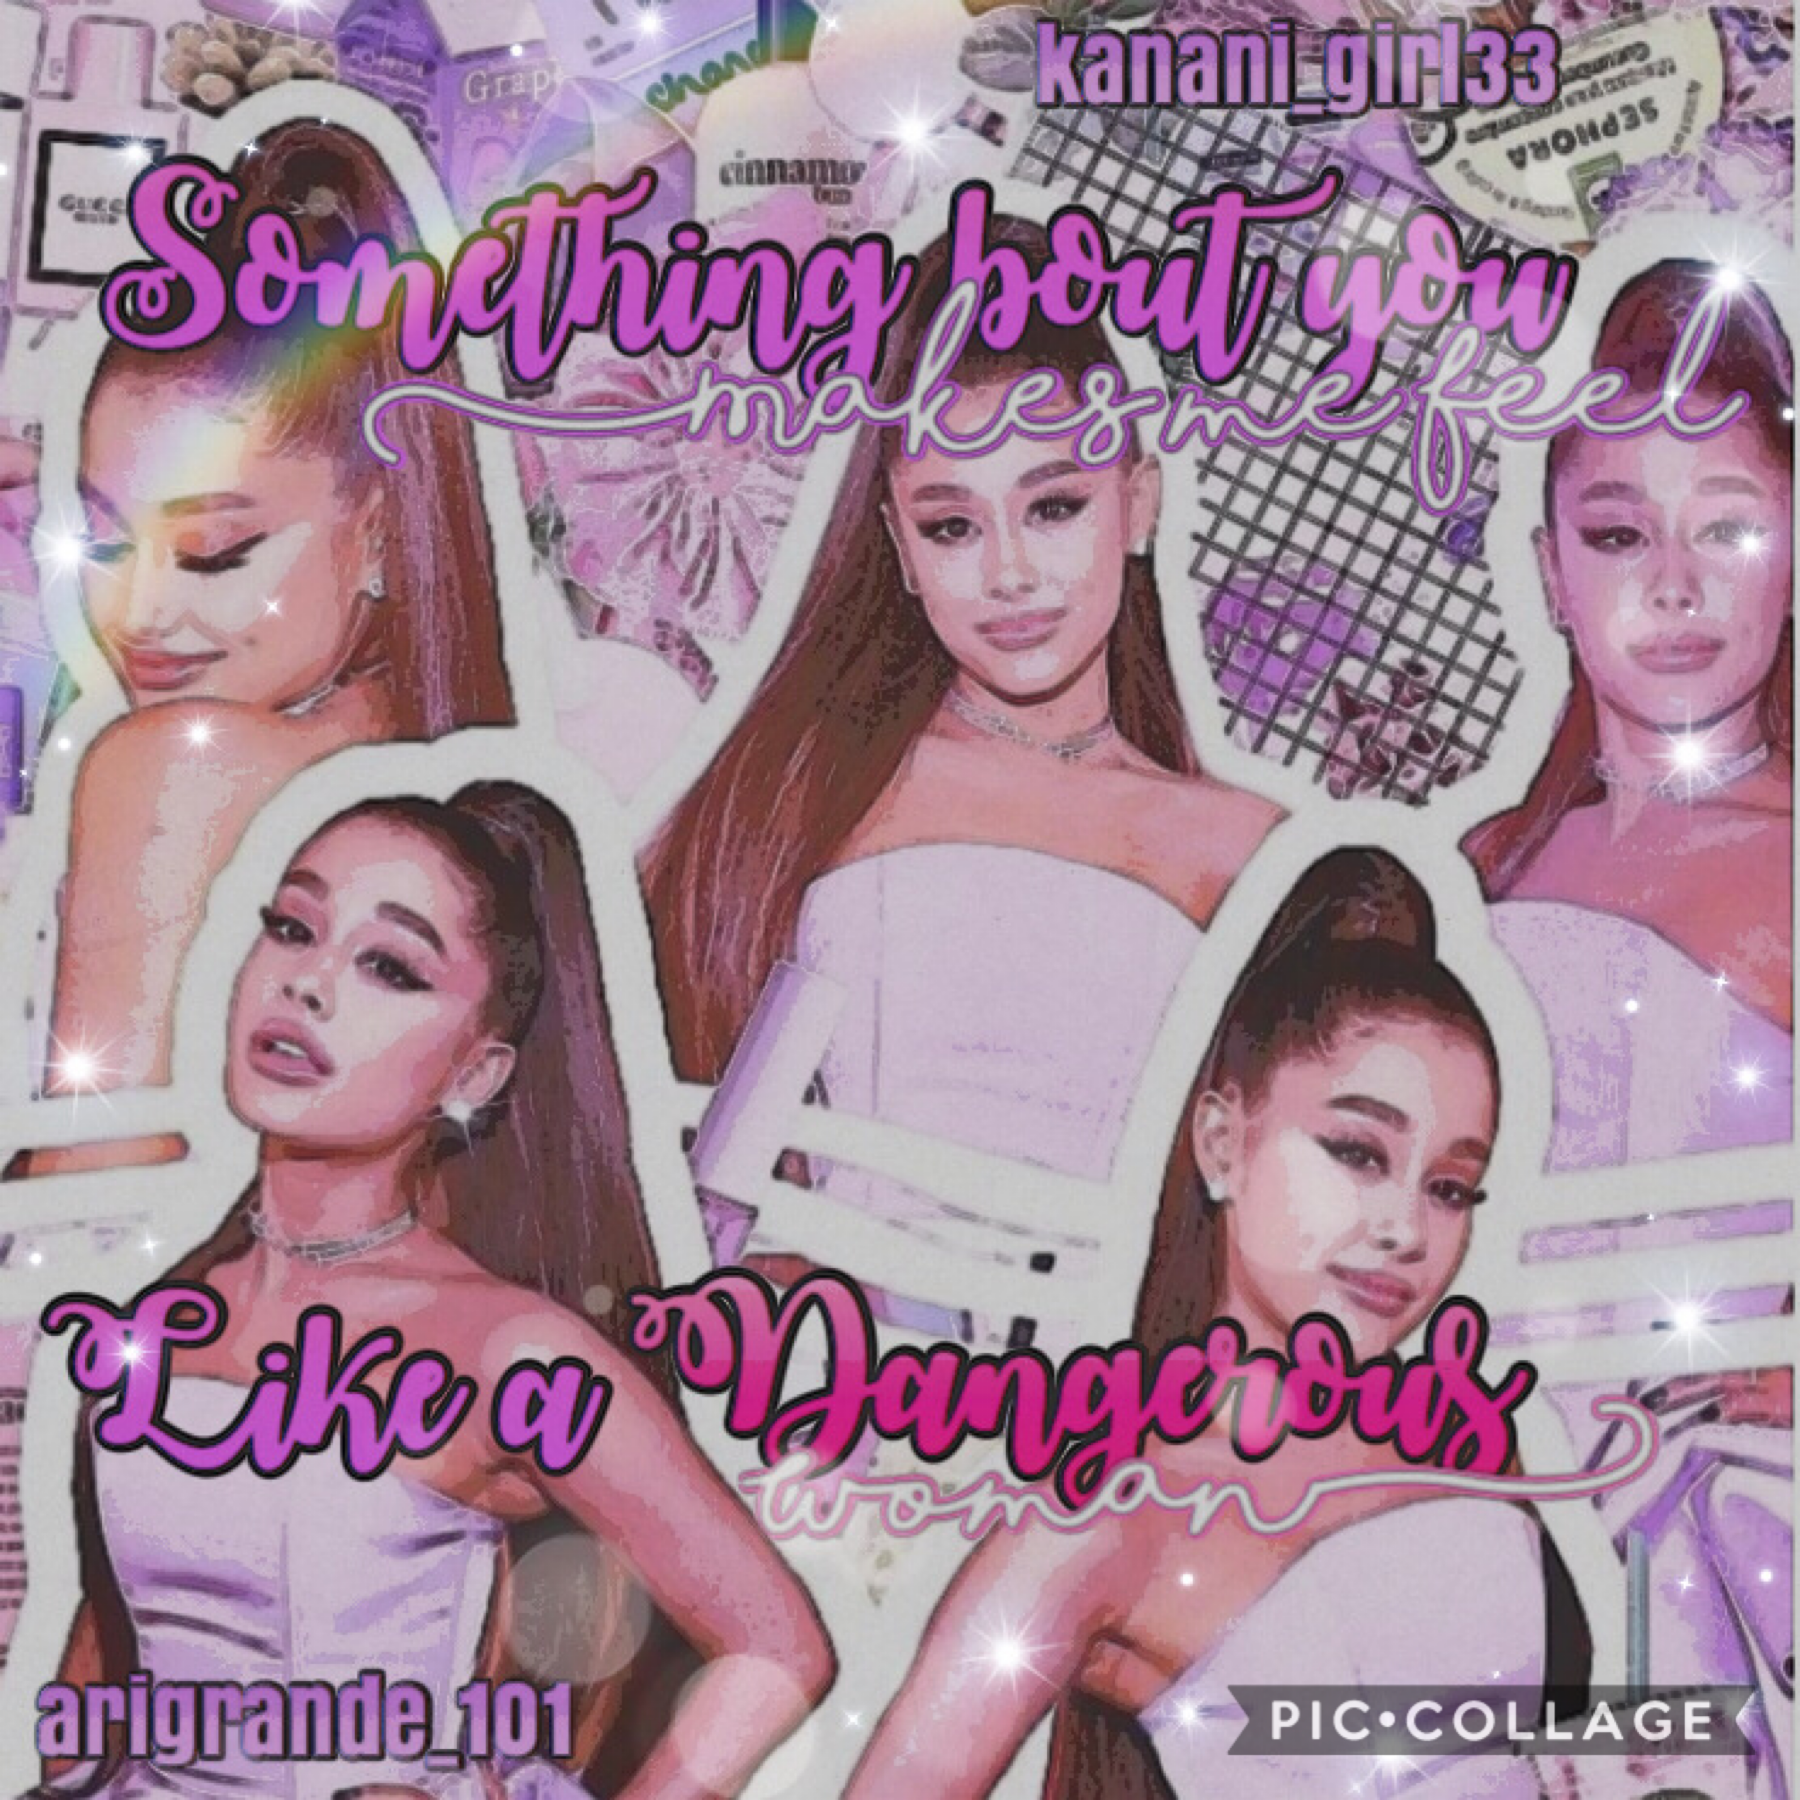 ☆January 1, 2020☆ 
Collab with ♥️♥️♥️
Arigrande_101!
Go follow this amazing collager RIGHT NOW!! HAPPY NEW YEARS EVERYONE!! Qotd: what are you looking forward to this year?